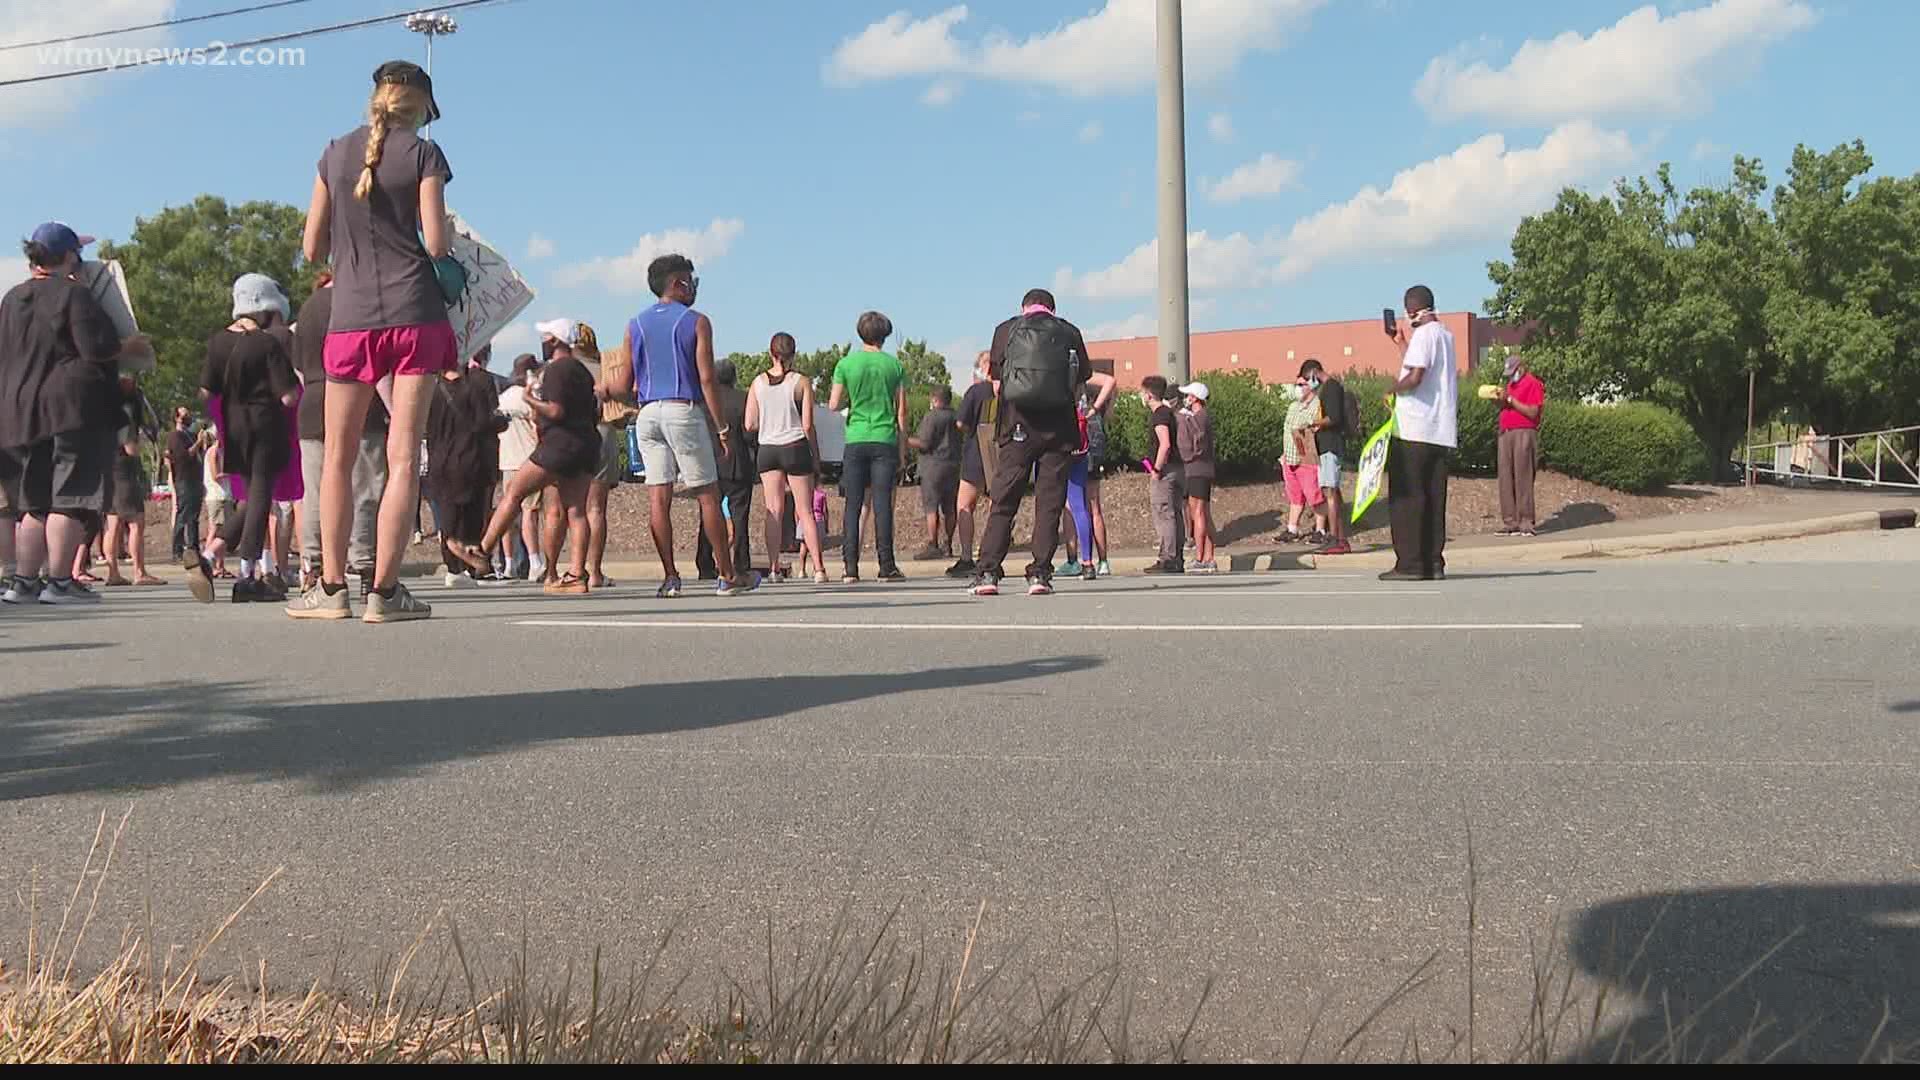 More than 100 protesters marched down University Parkway. They started in front of LJVM Coliseum and moved down to Reynolda Road.